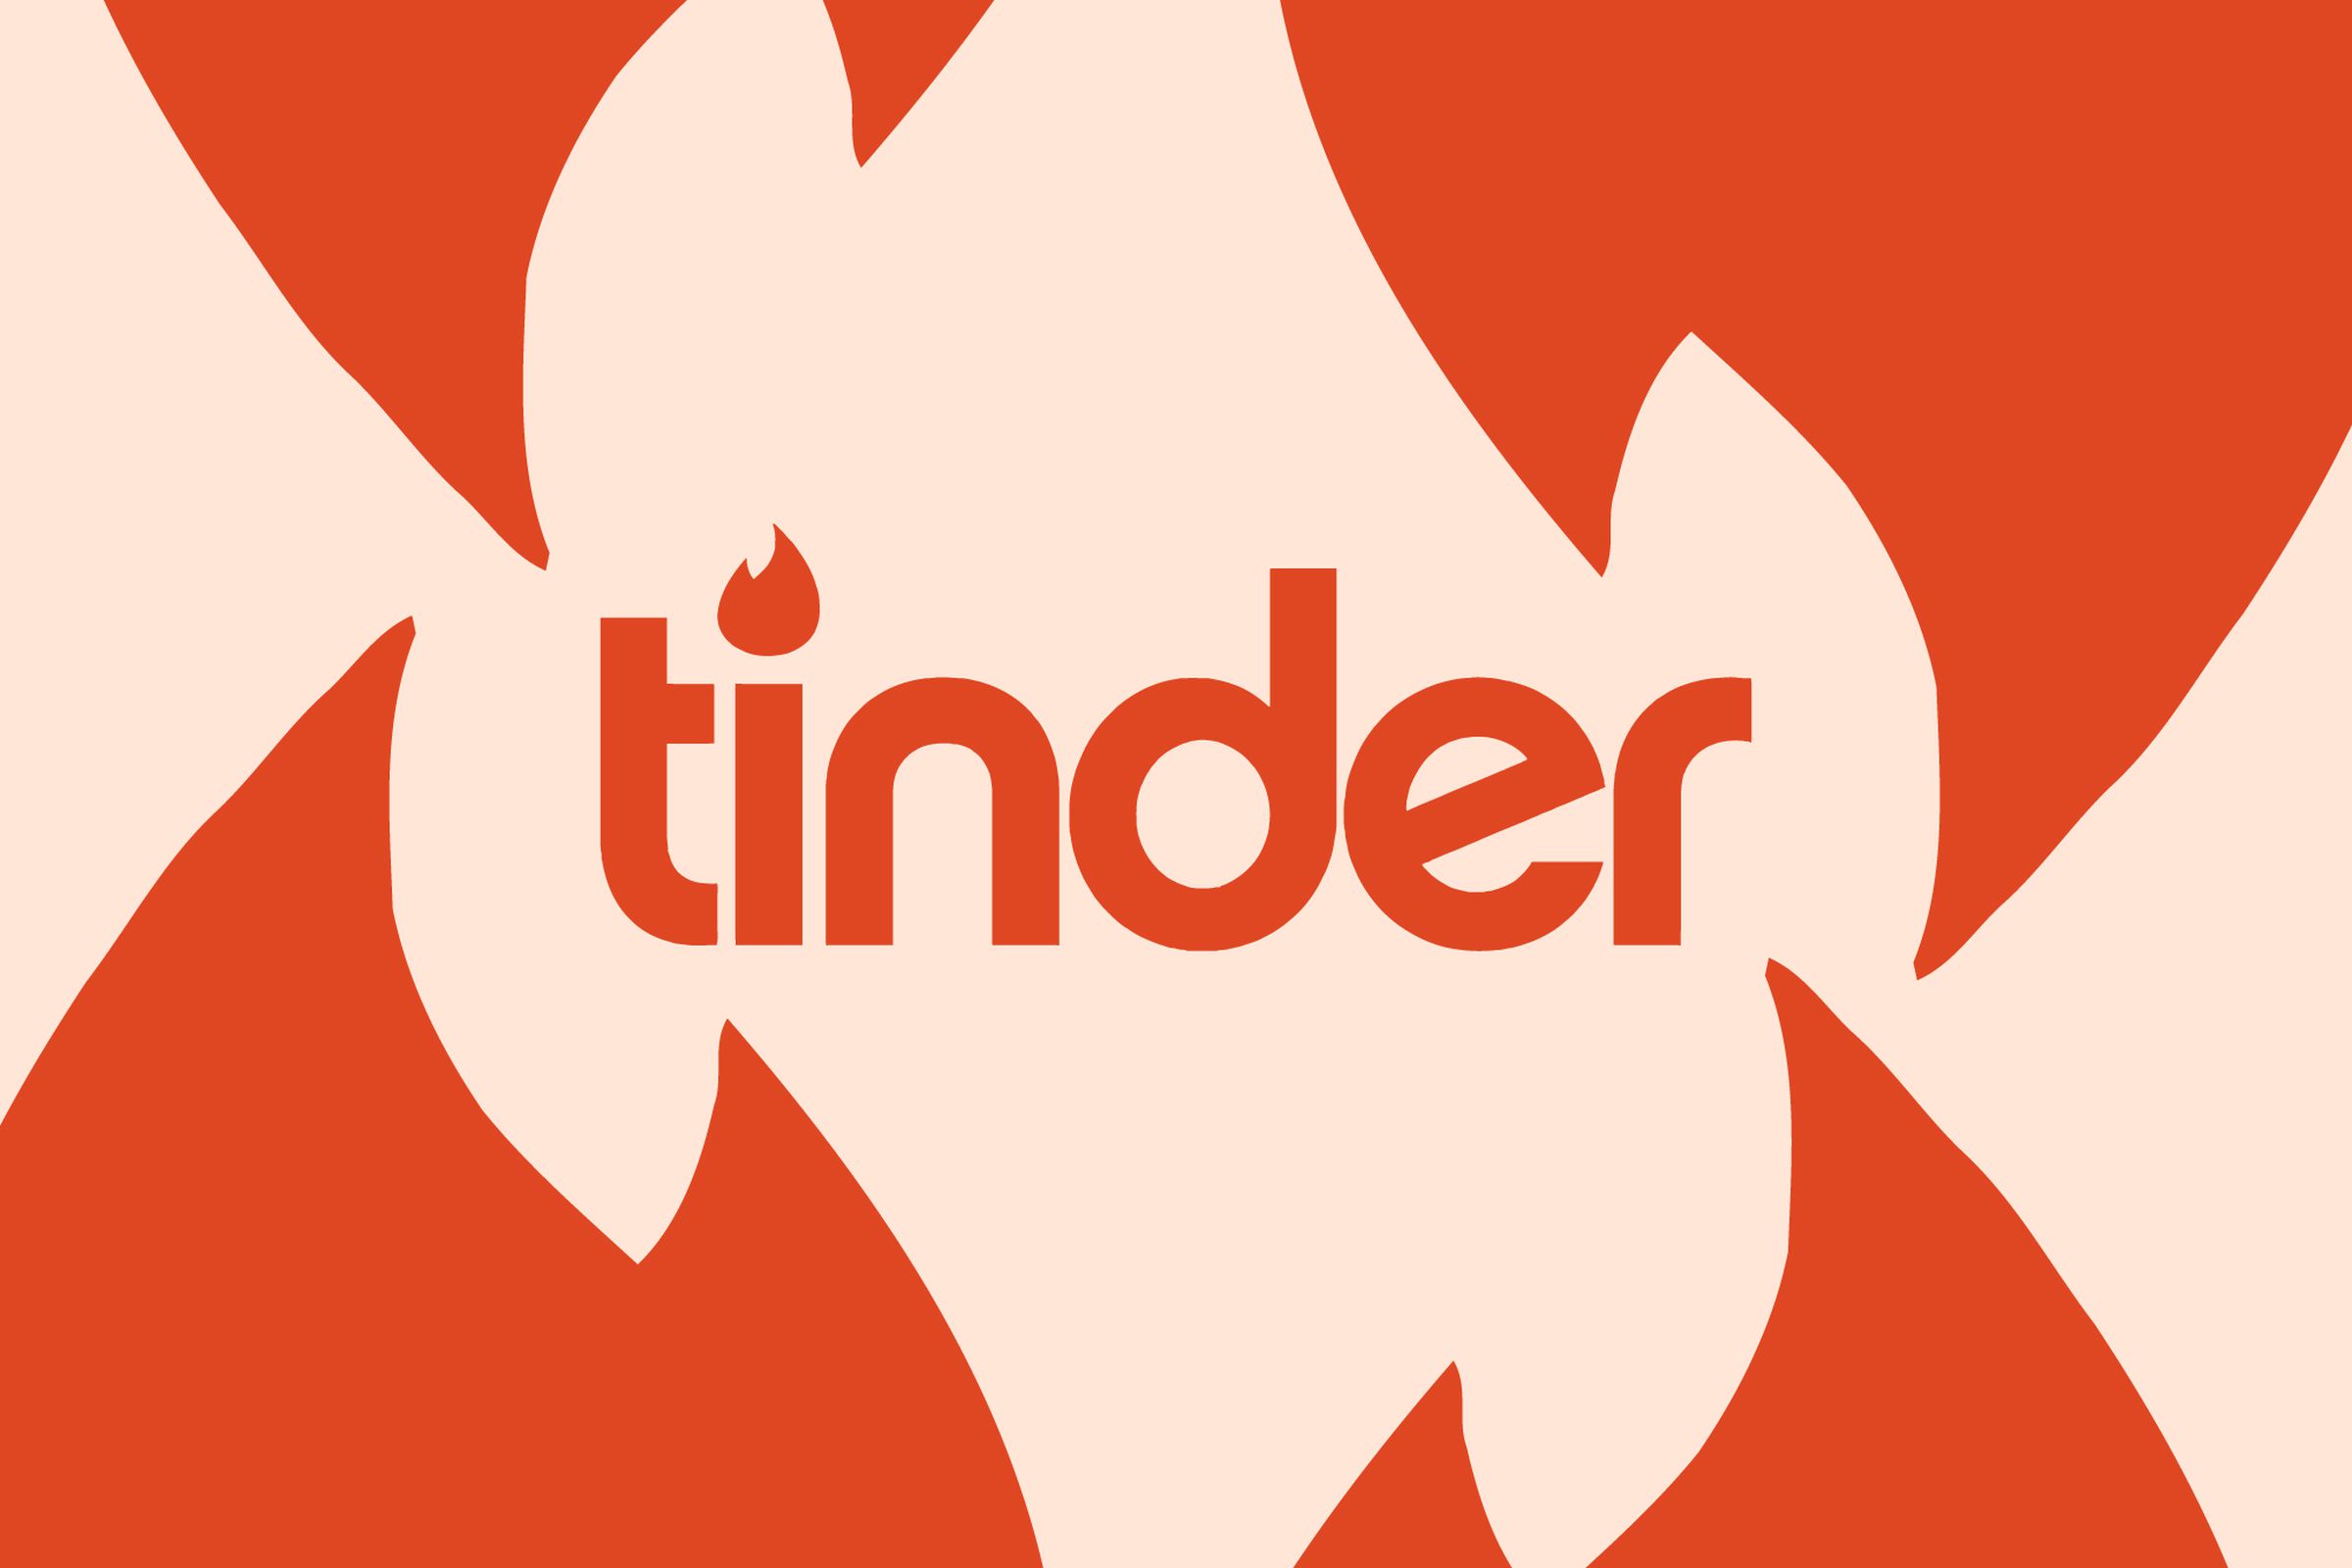 A stylized logo for Tinder.